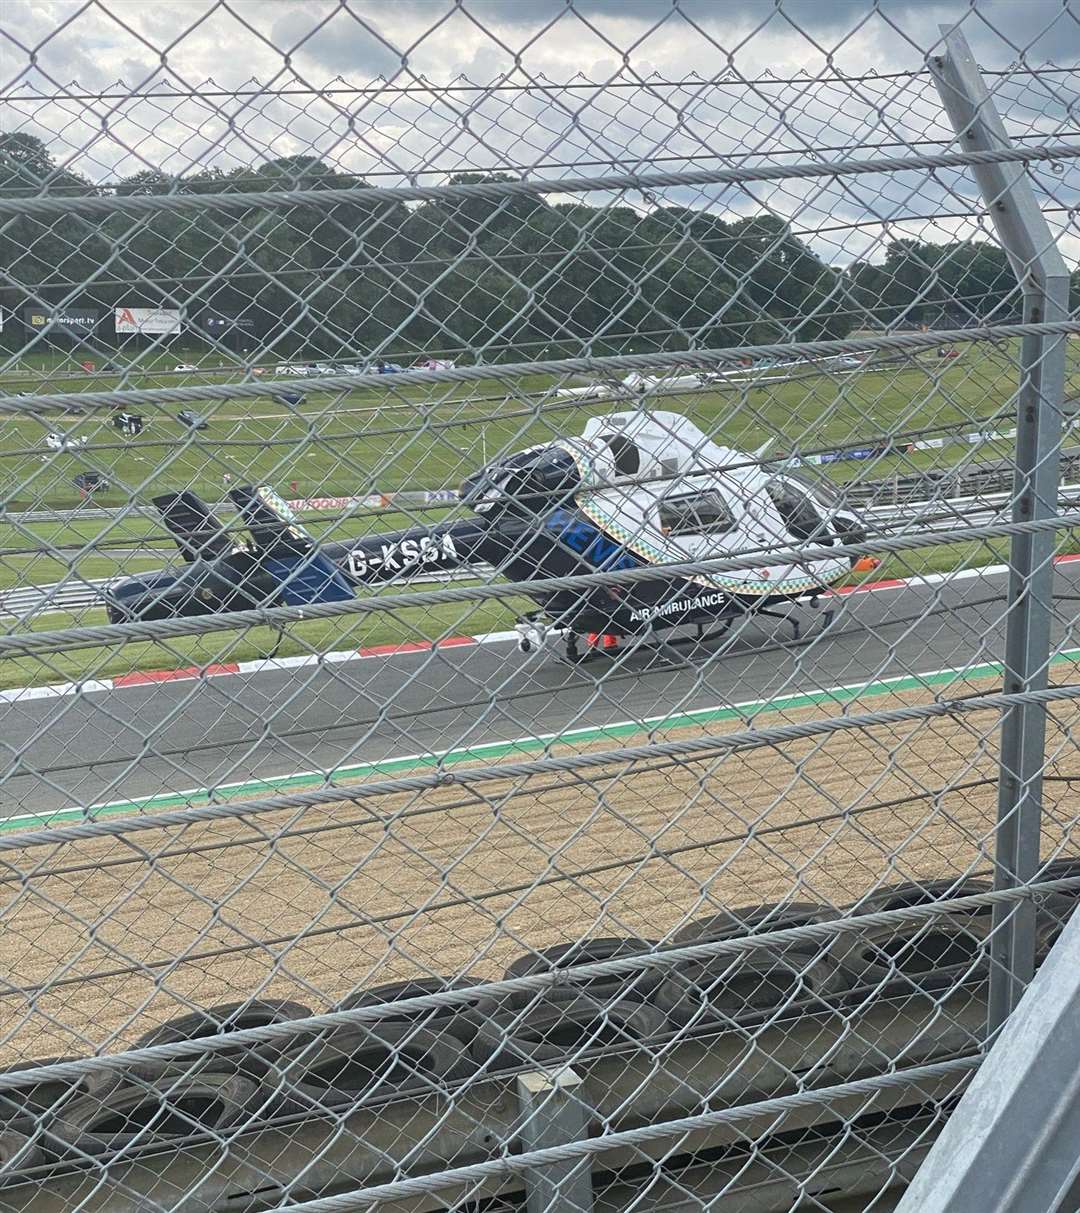 The air ambulance at the scene of the crash at Brands Hatch. Picture: @FlooringKimpton/Twitter